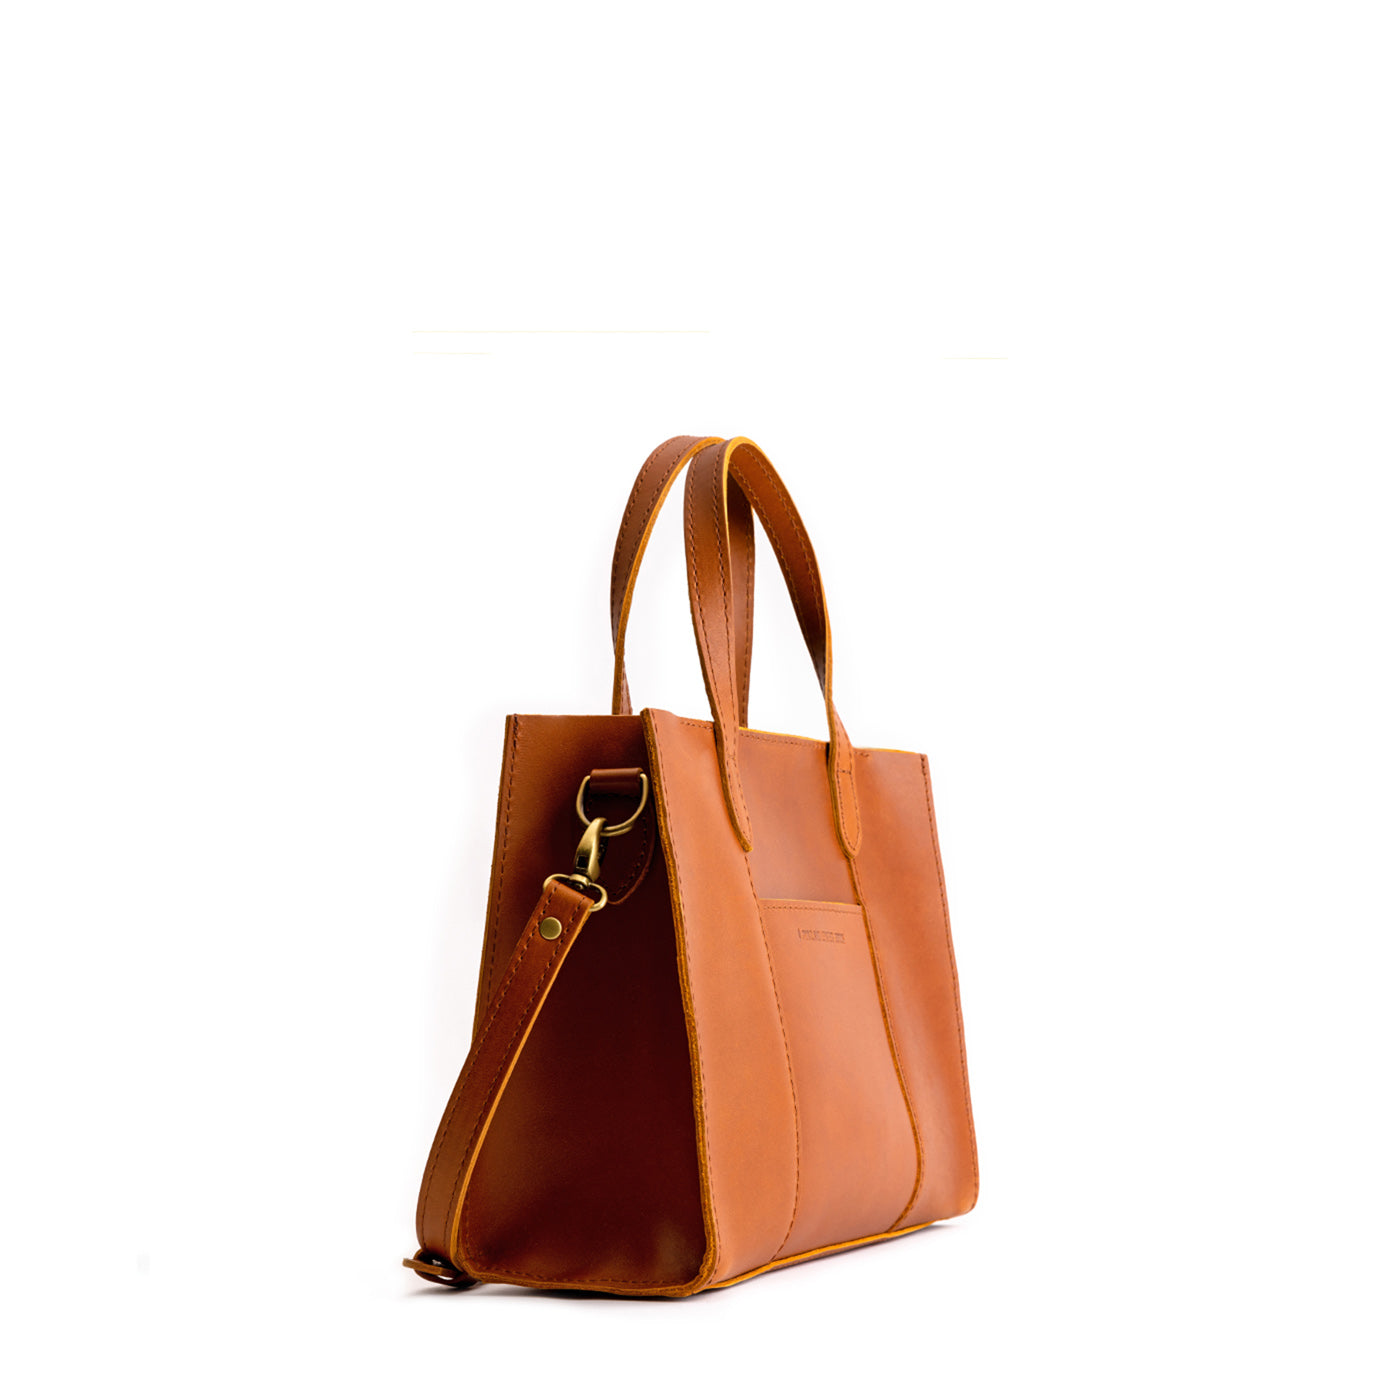 Honey*Zipper | Structured mid-size tote bag with overlapping panels and crossbody strap